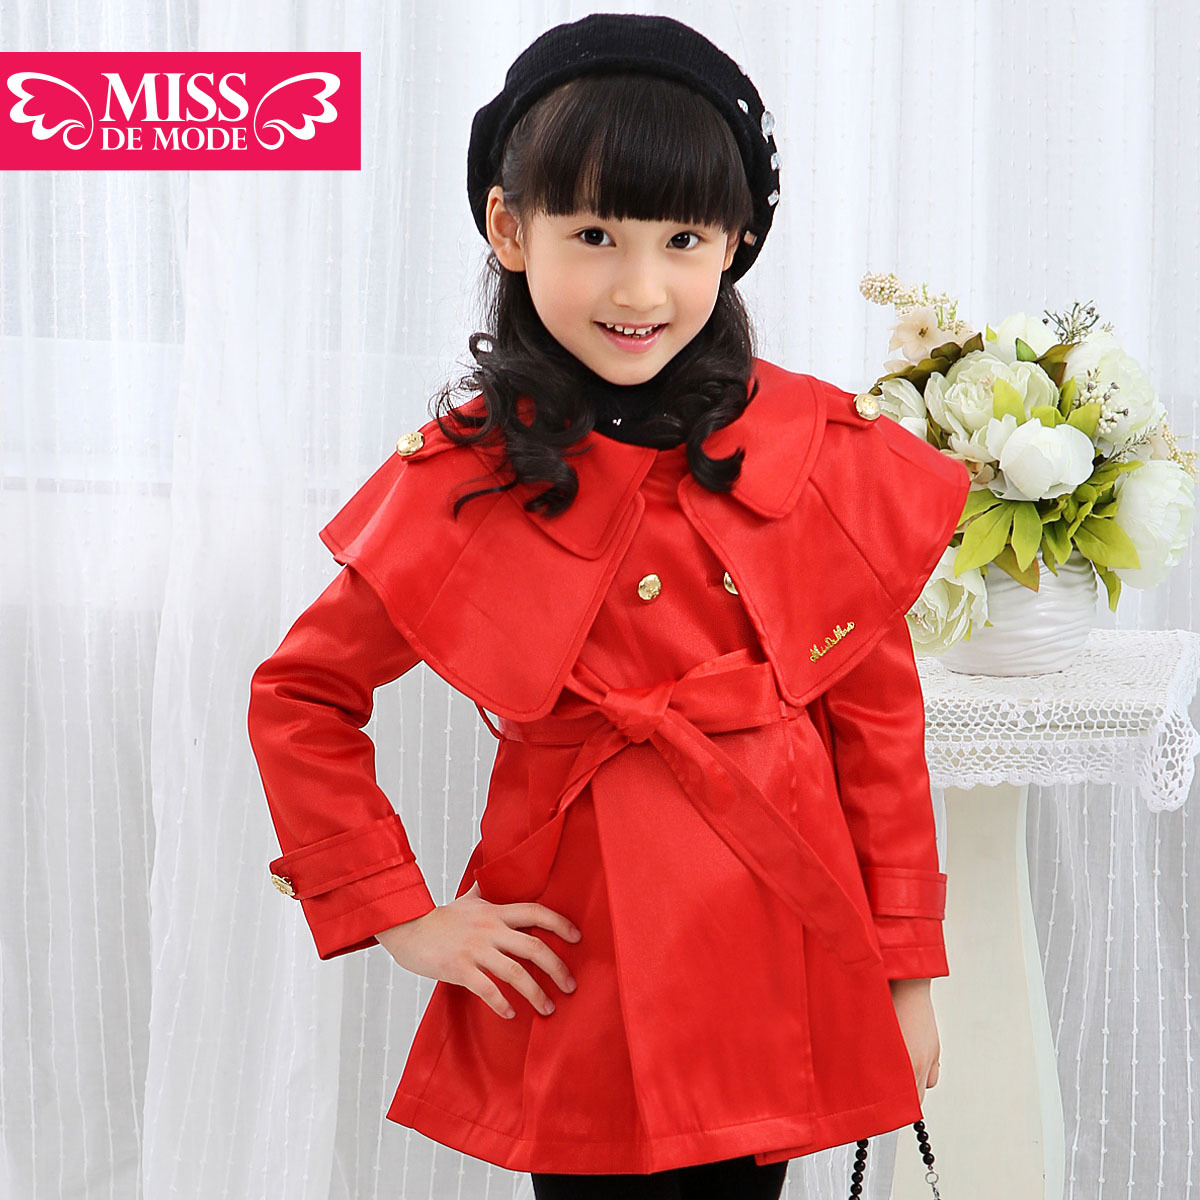 $ Children's clothing female child fashion cape trench paragraph outerwear 2013 child spring